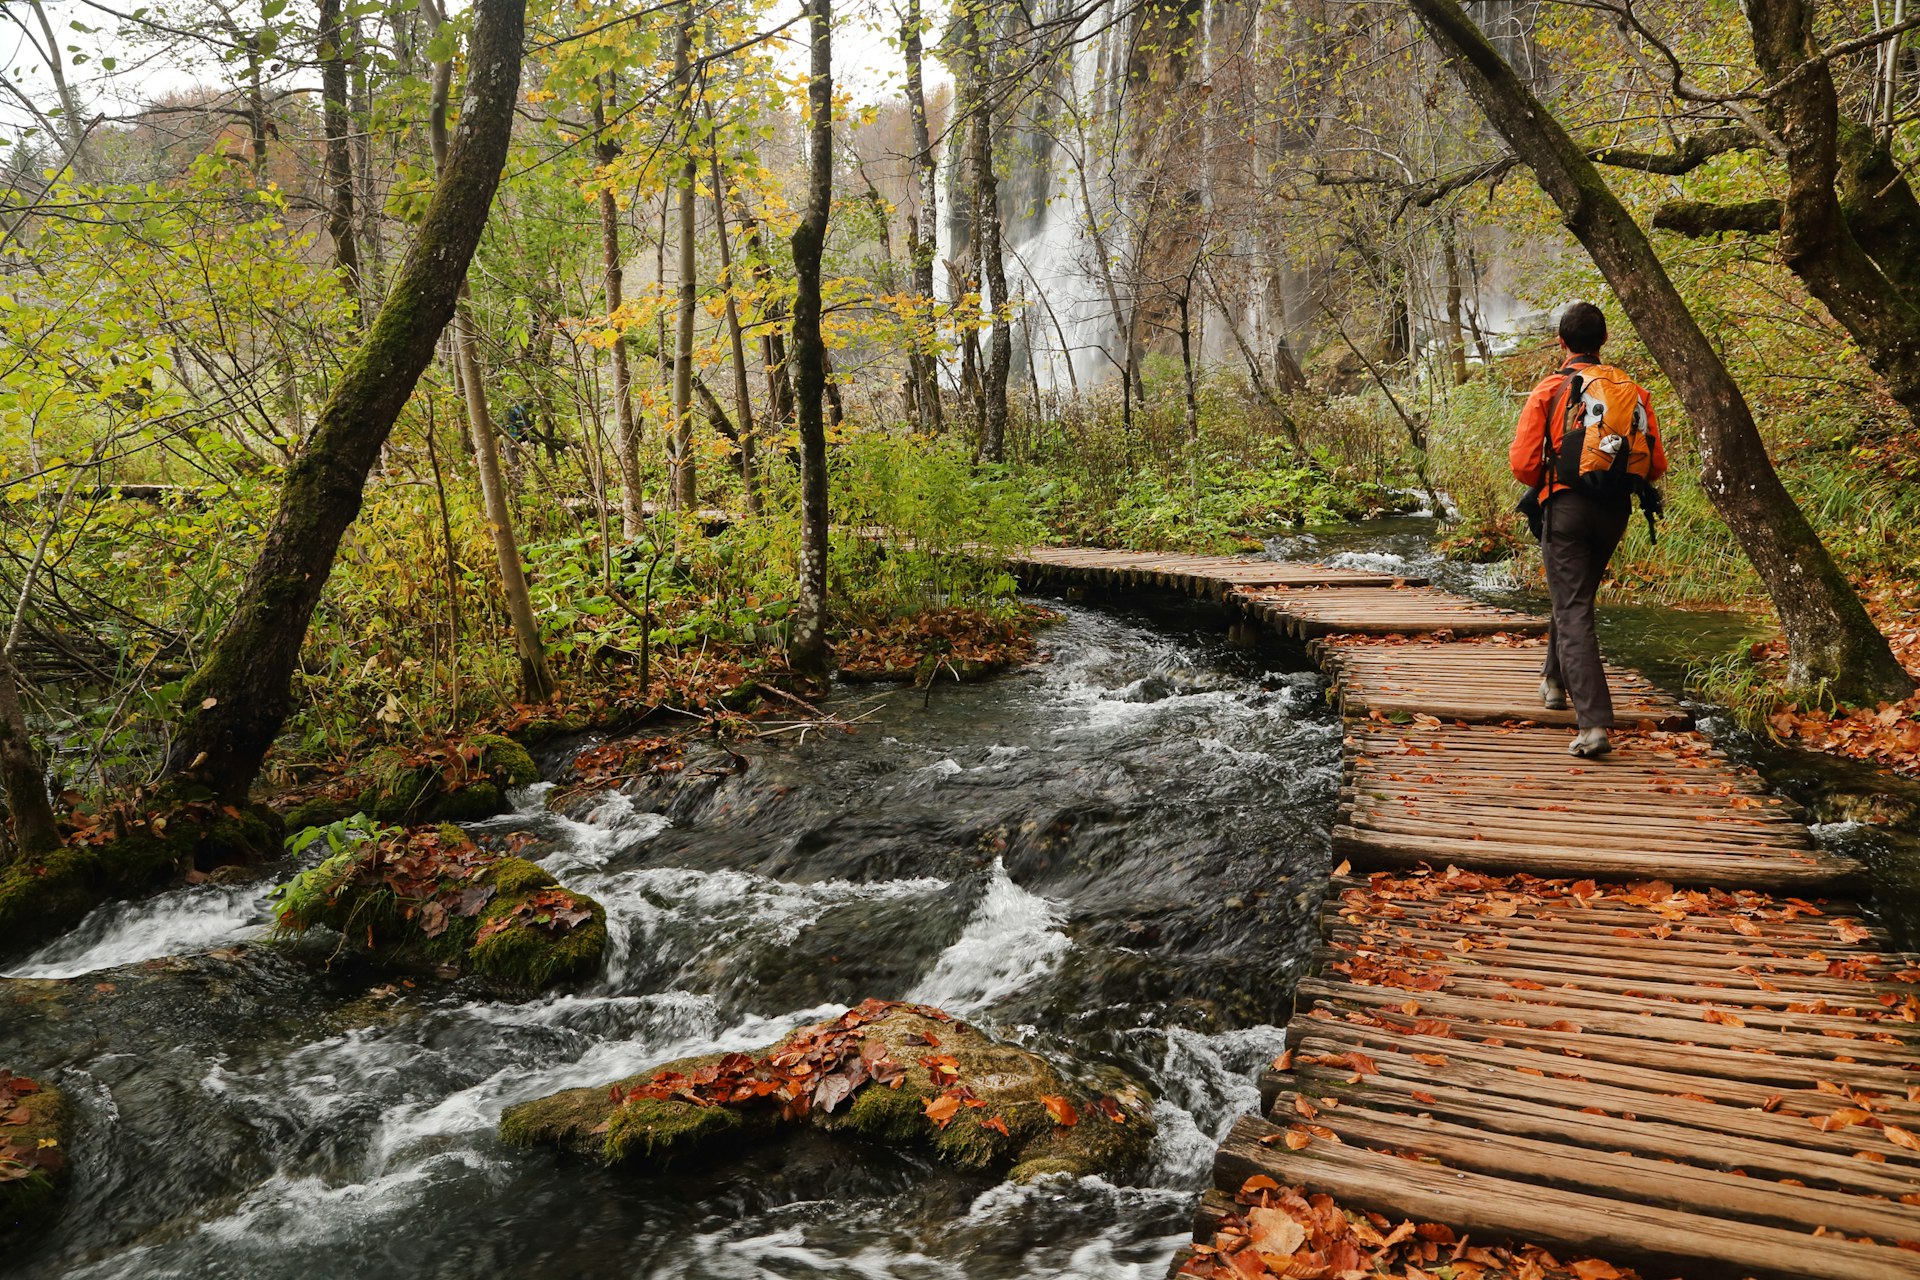 A man walking on a boardwalk over a stream with a waterfall visible through the trees in Plitvice Lakes National Park